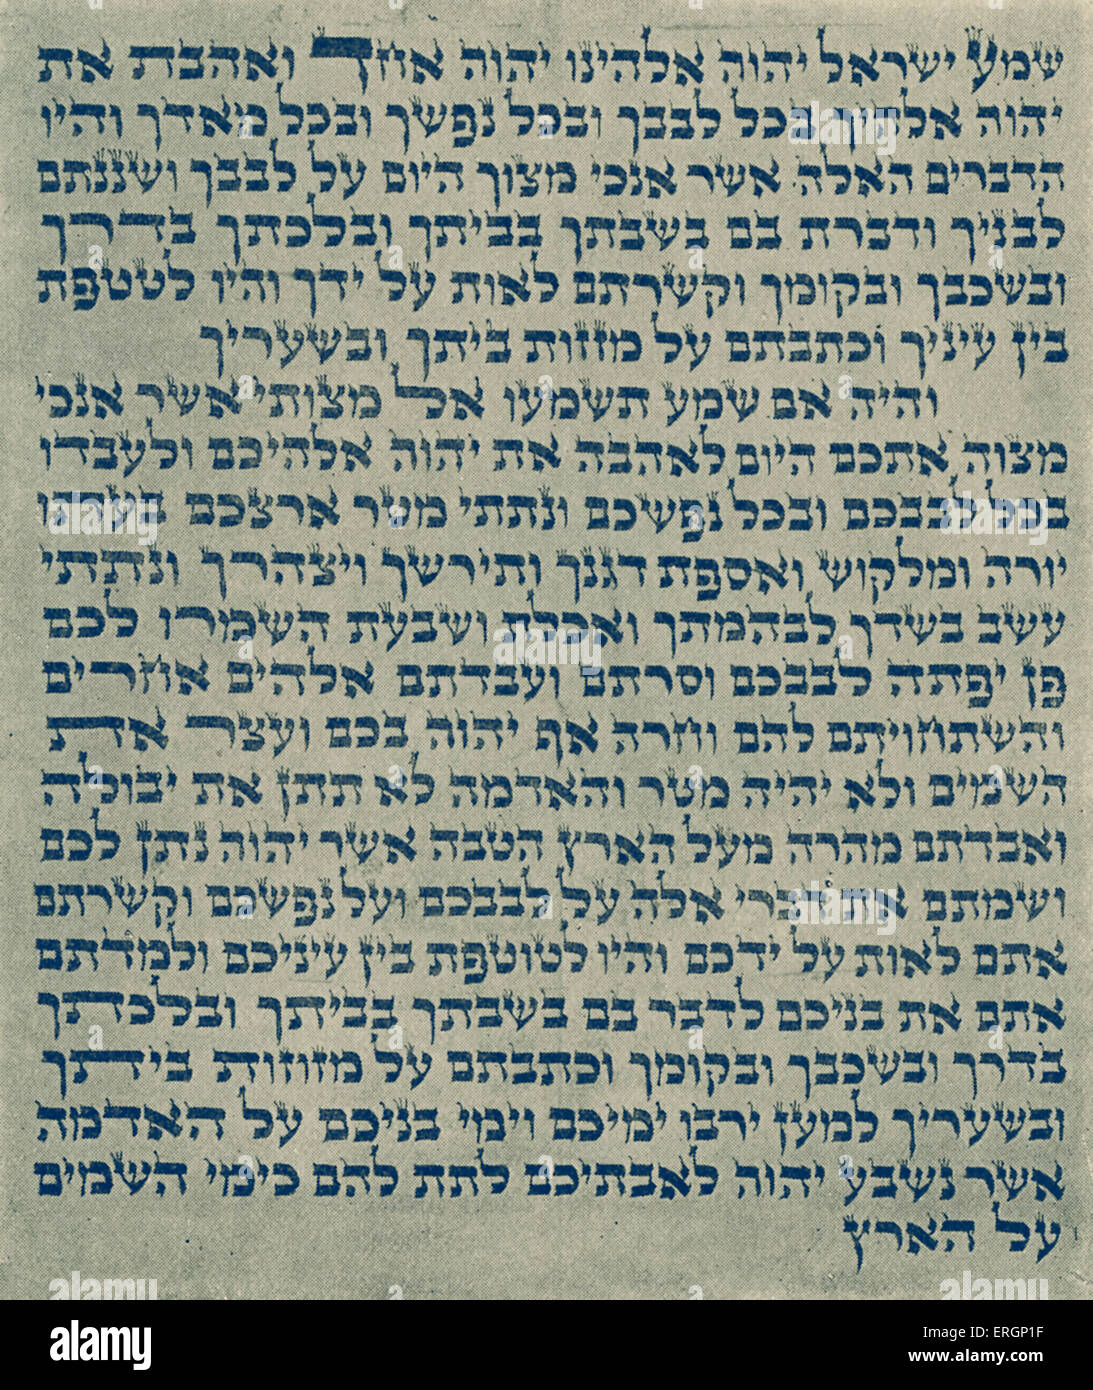 Mezuzah Scroll, a piece of parchment inscribed in Hebrew, with the prayer 'Shema Yisrael'. The parchment is rolled up, contained in a decorative case and attached to the doorpost of Jewish homes. Stock Photo